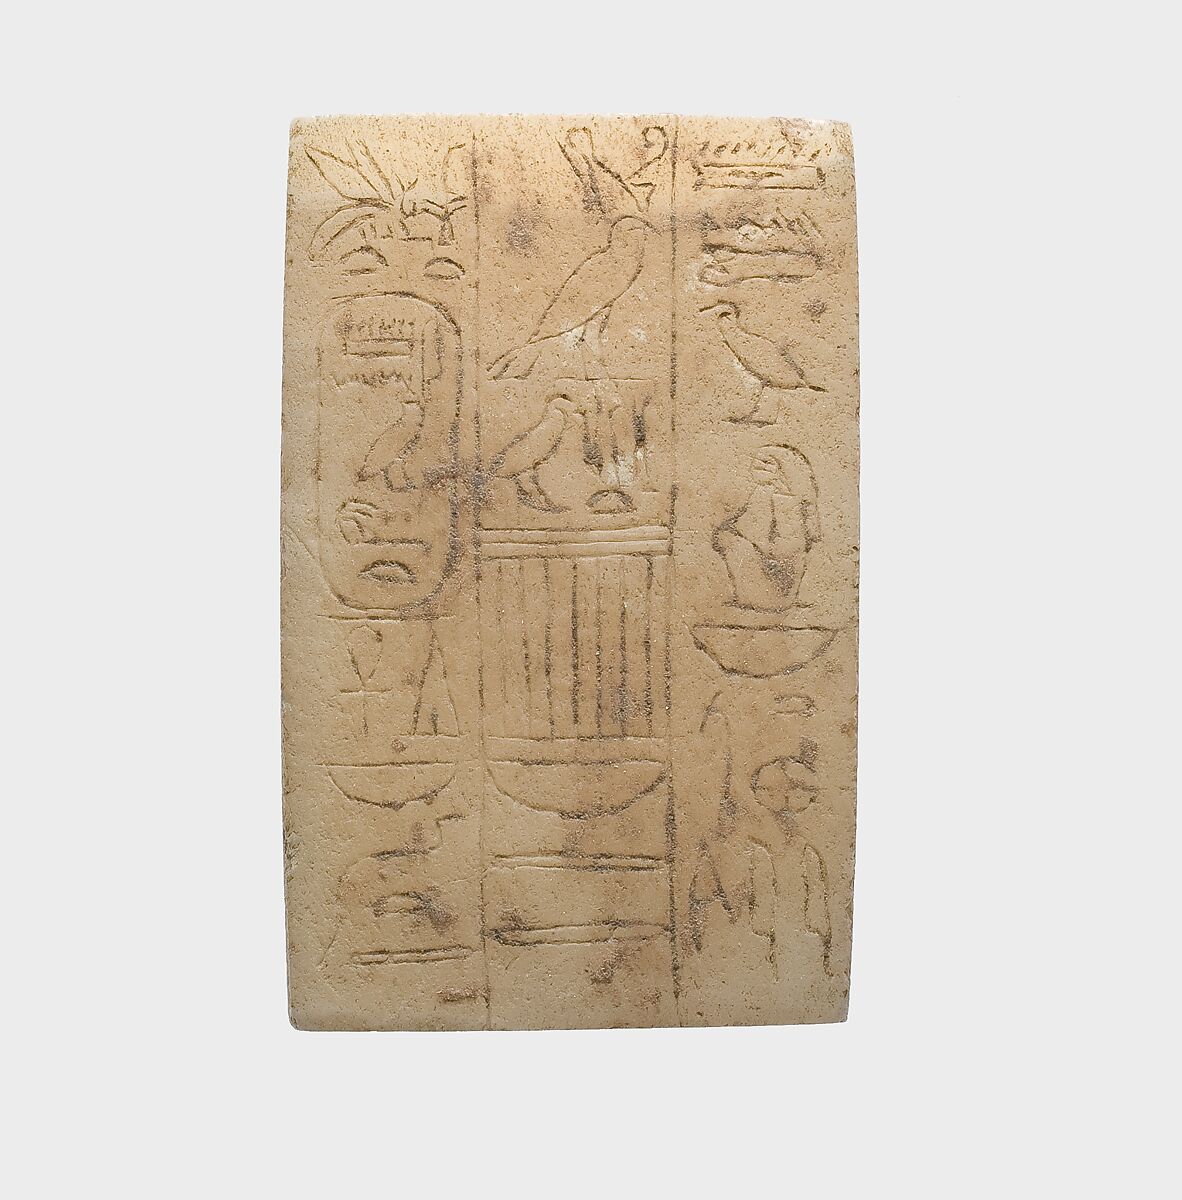 Plaque Inscribed with the Cartouche of Amenemhat I, Travertine (Egyptian alabaster)